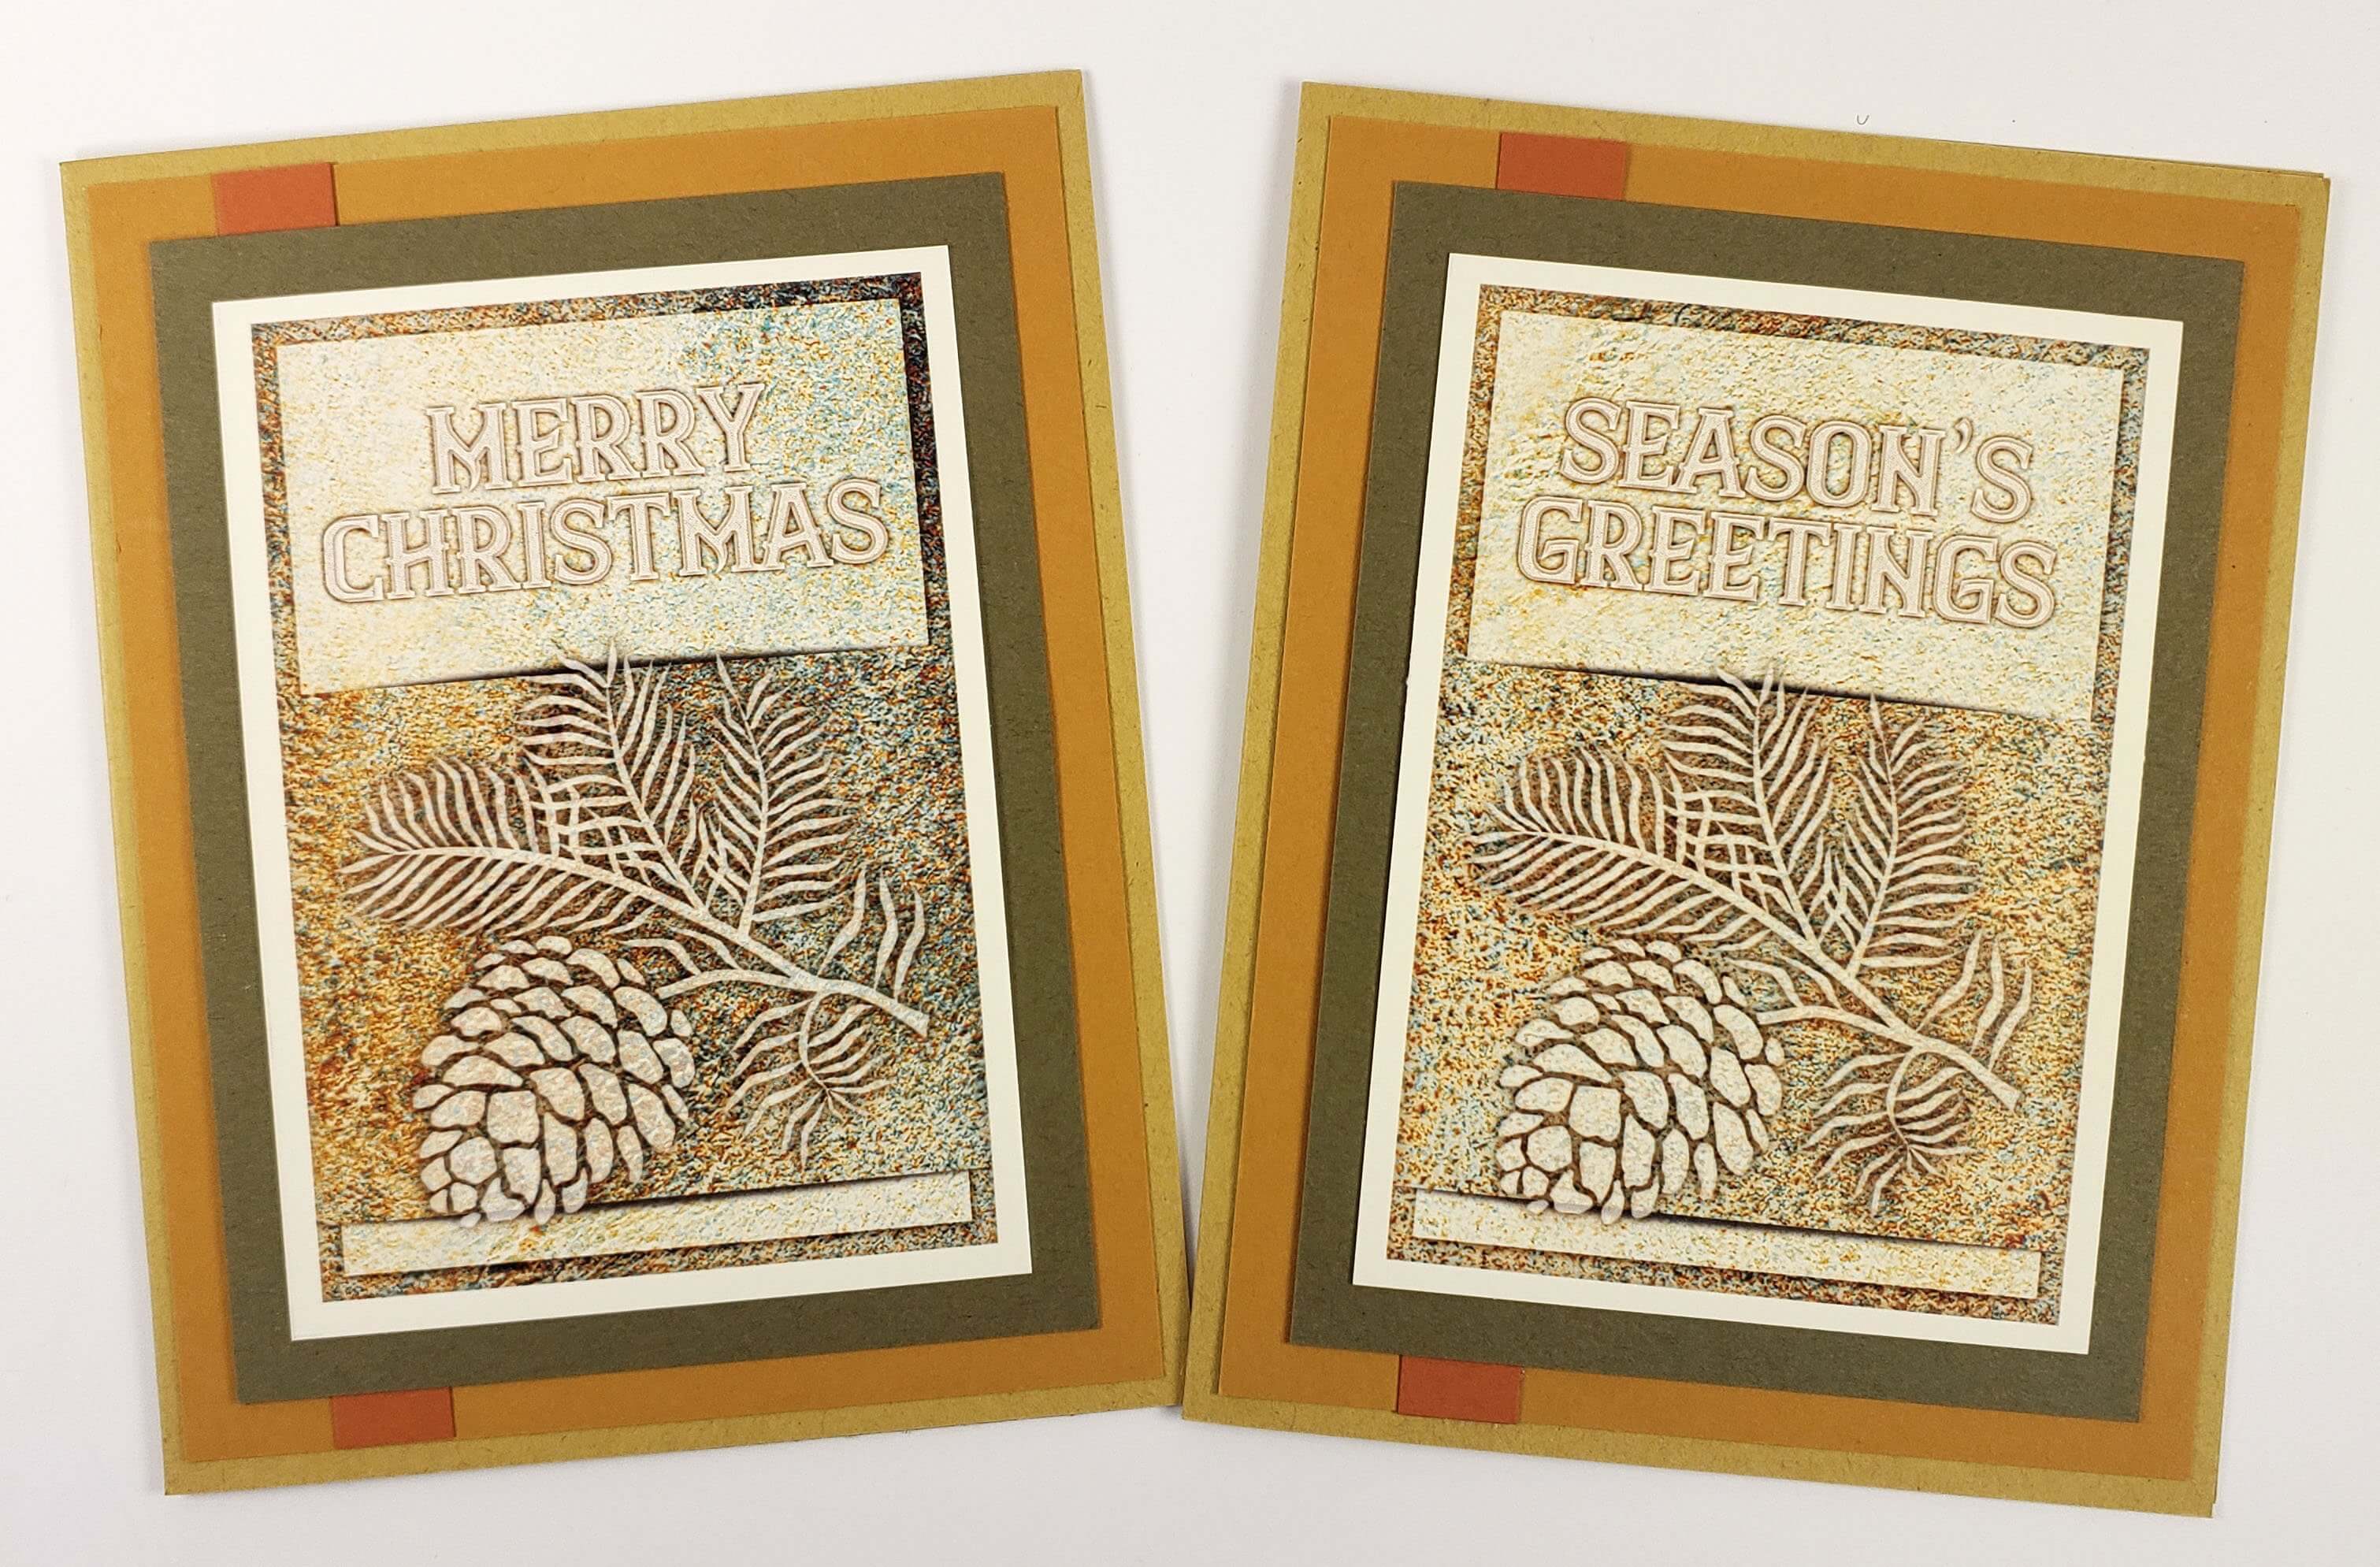 Lodge Christmas cards in non-traditional colors.